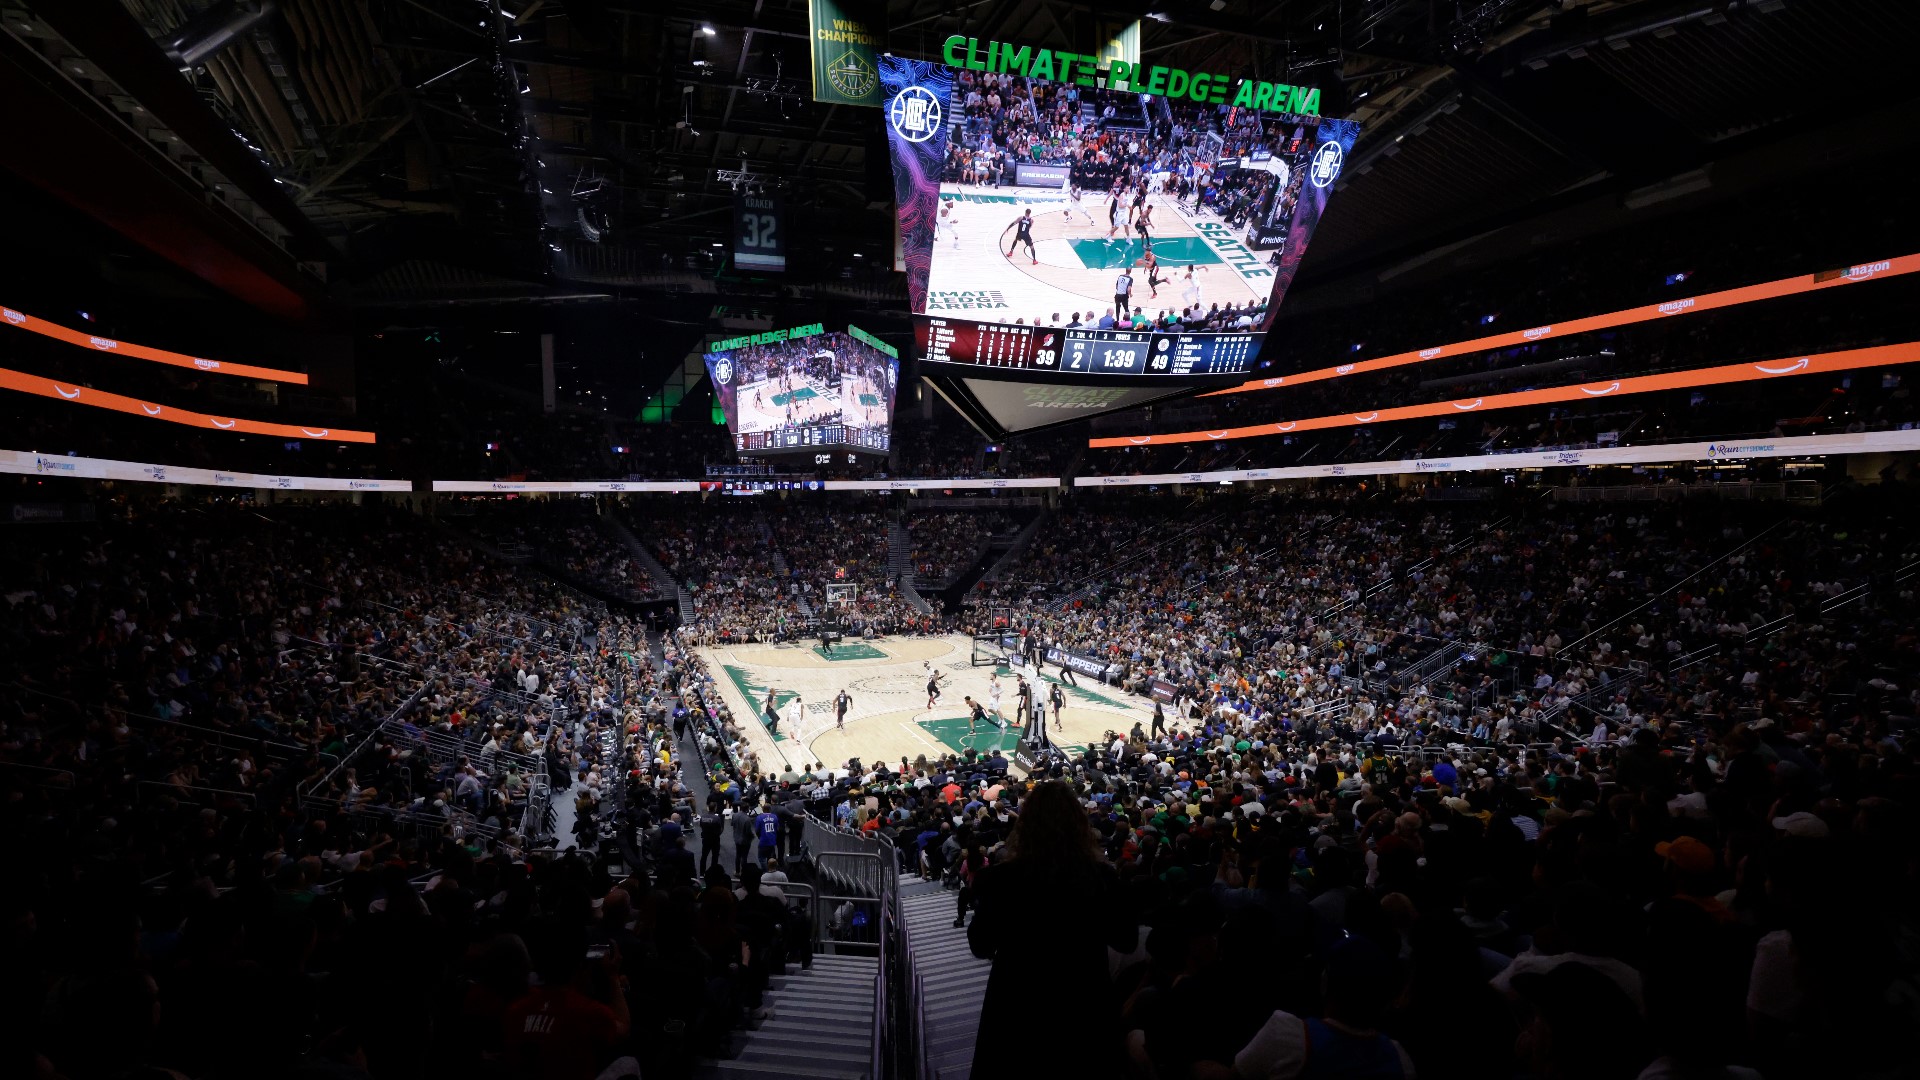 Seattle to host second annual NBA preseason game